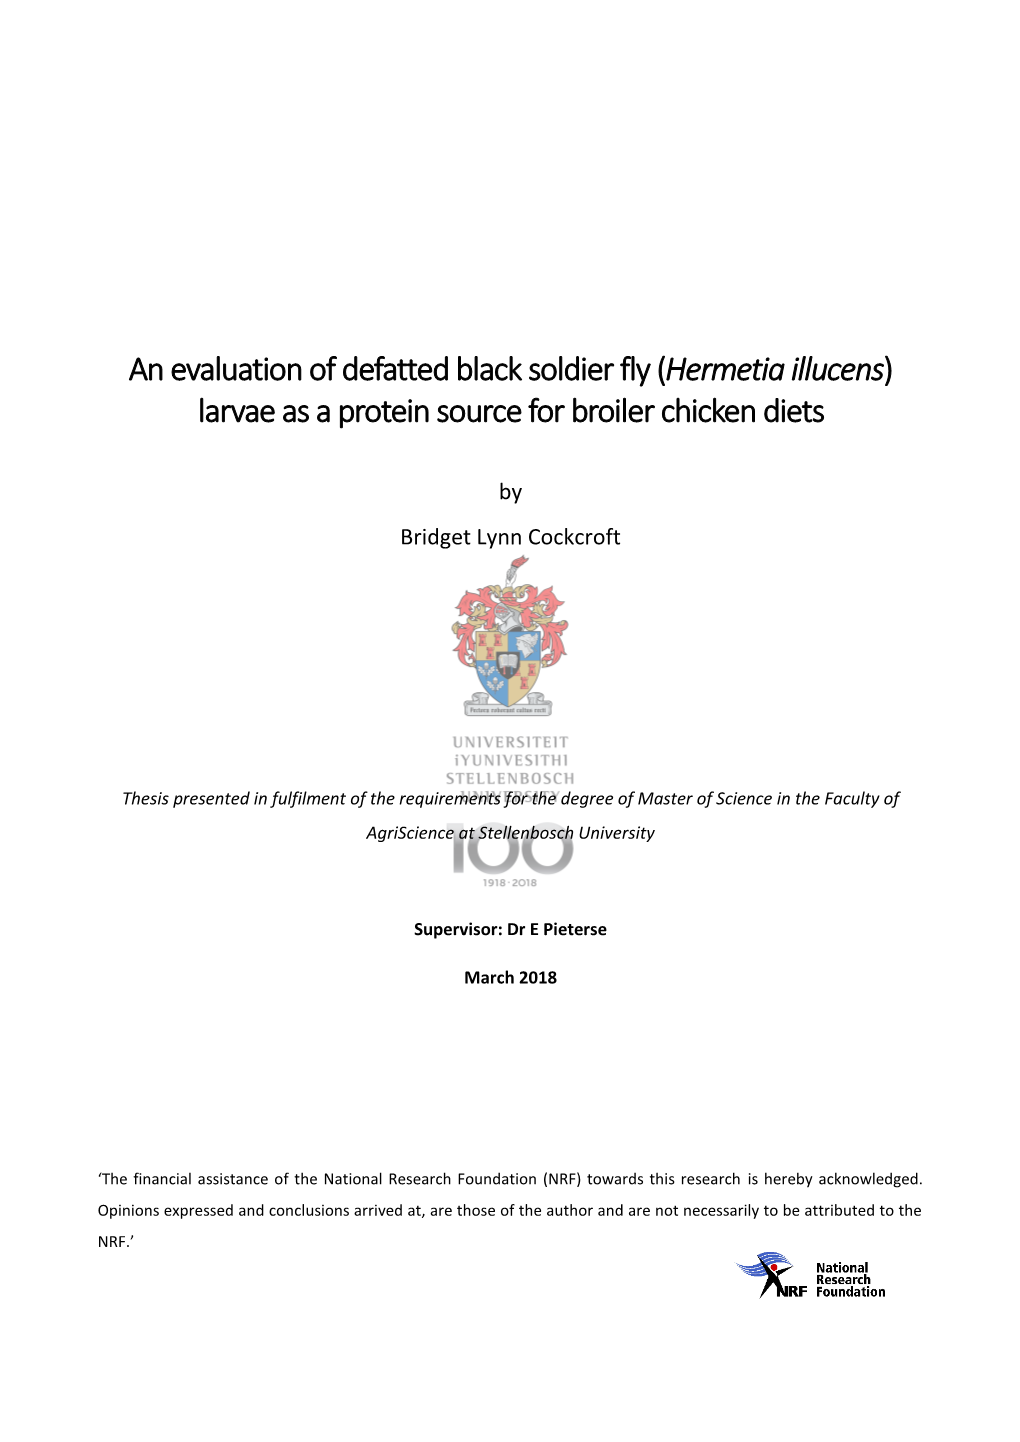 An Evaluation of Defatted Black Soldier Fly (Hermetia Illucens) Larvae As a Protein Source for Broiler Chicken Diets